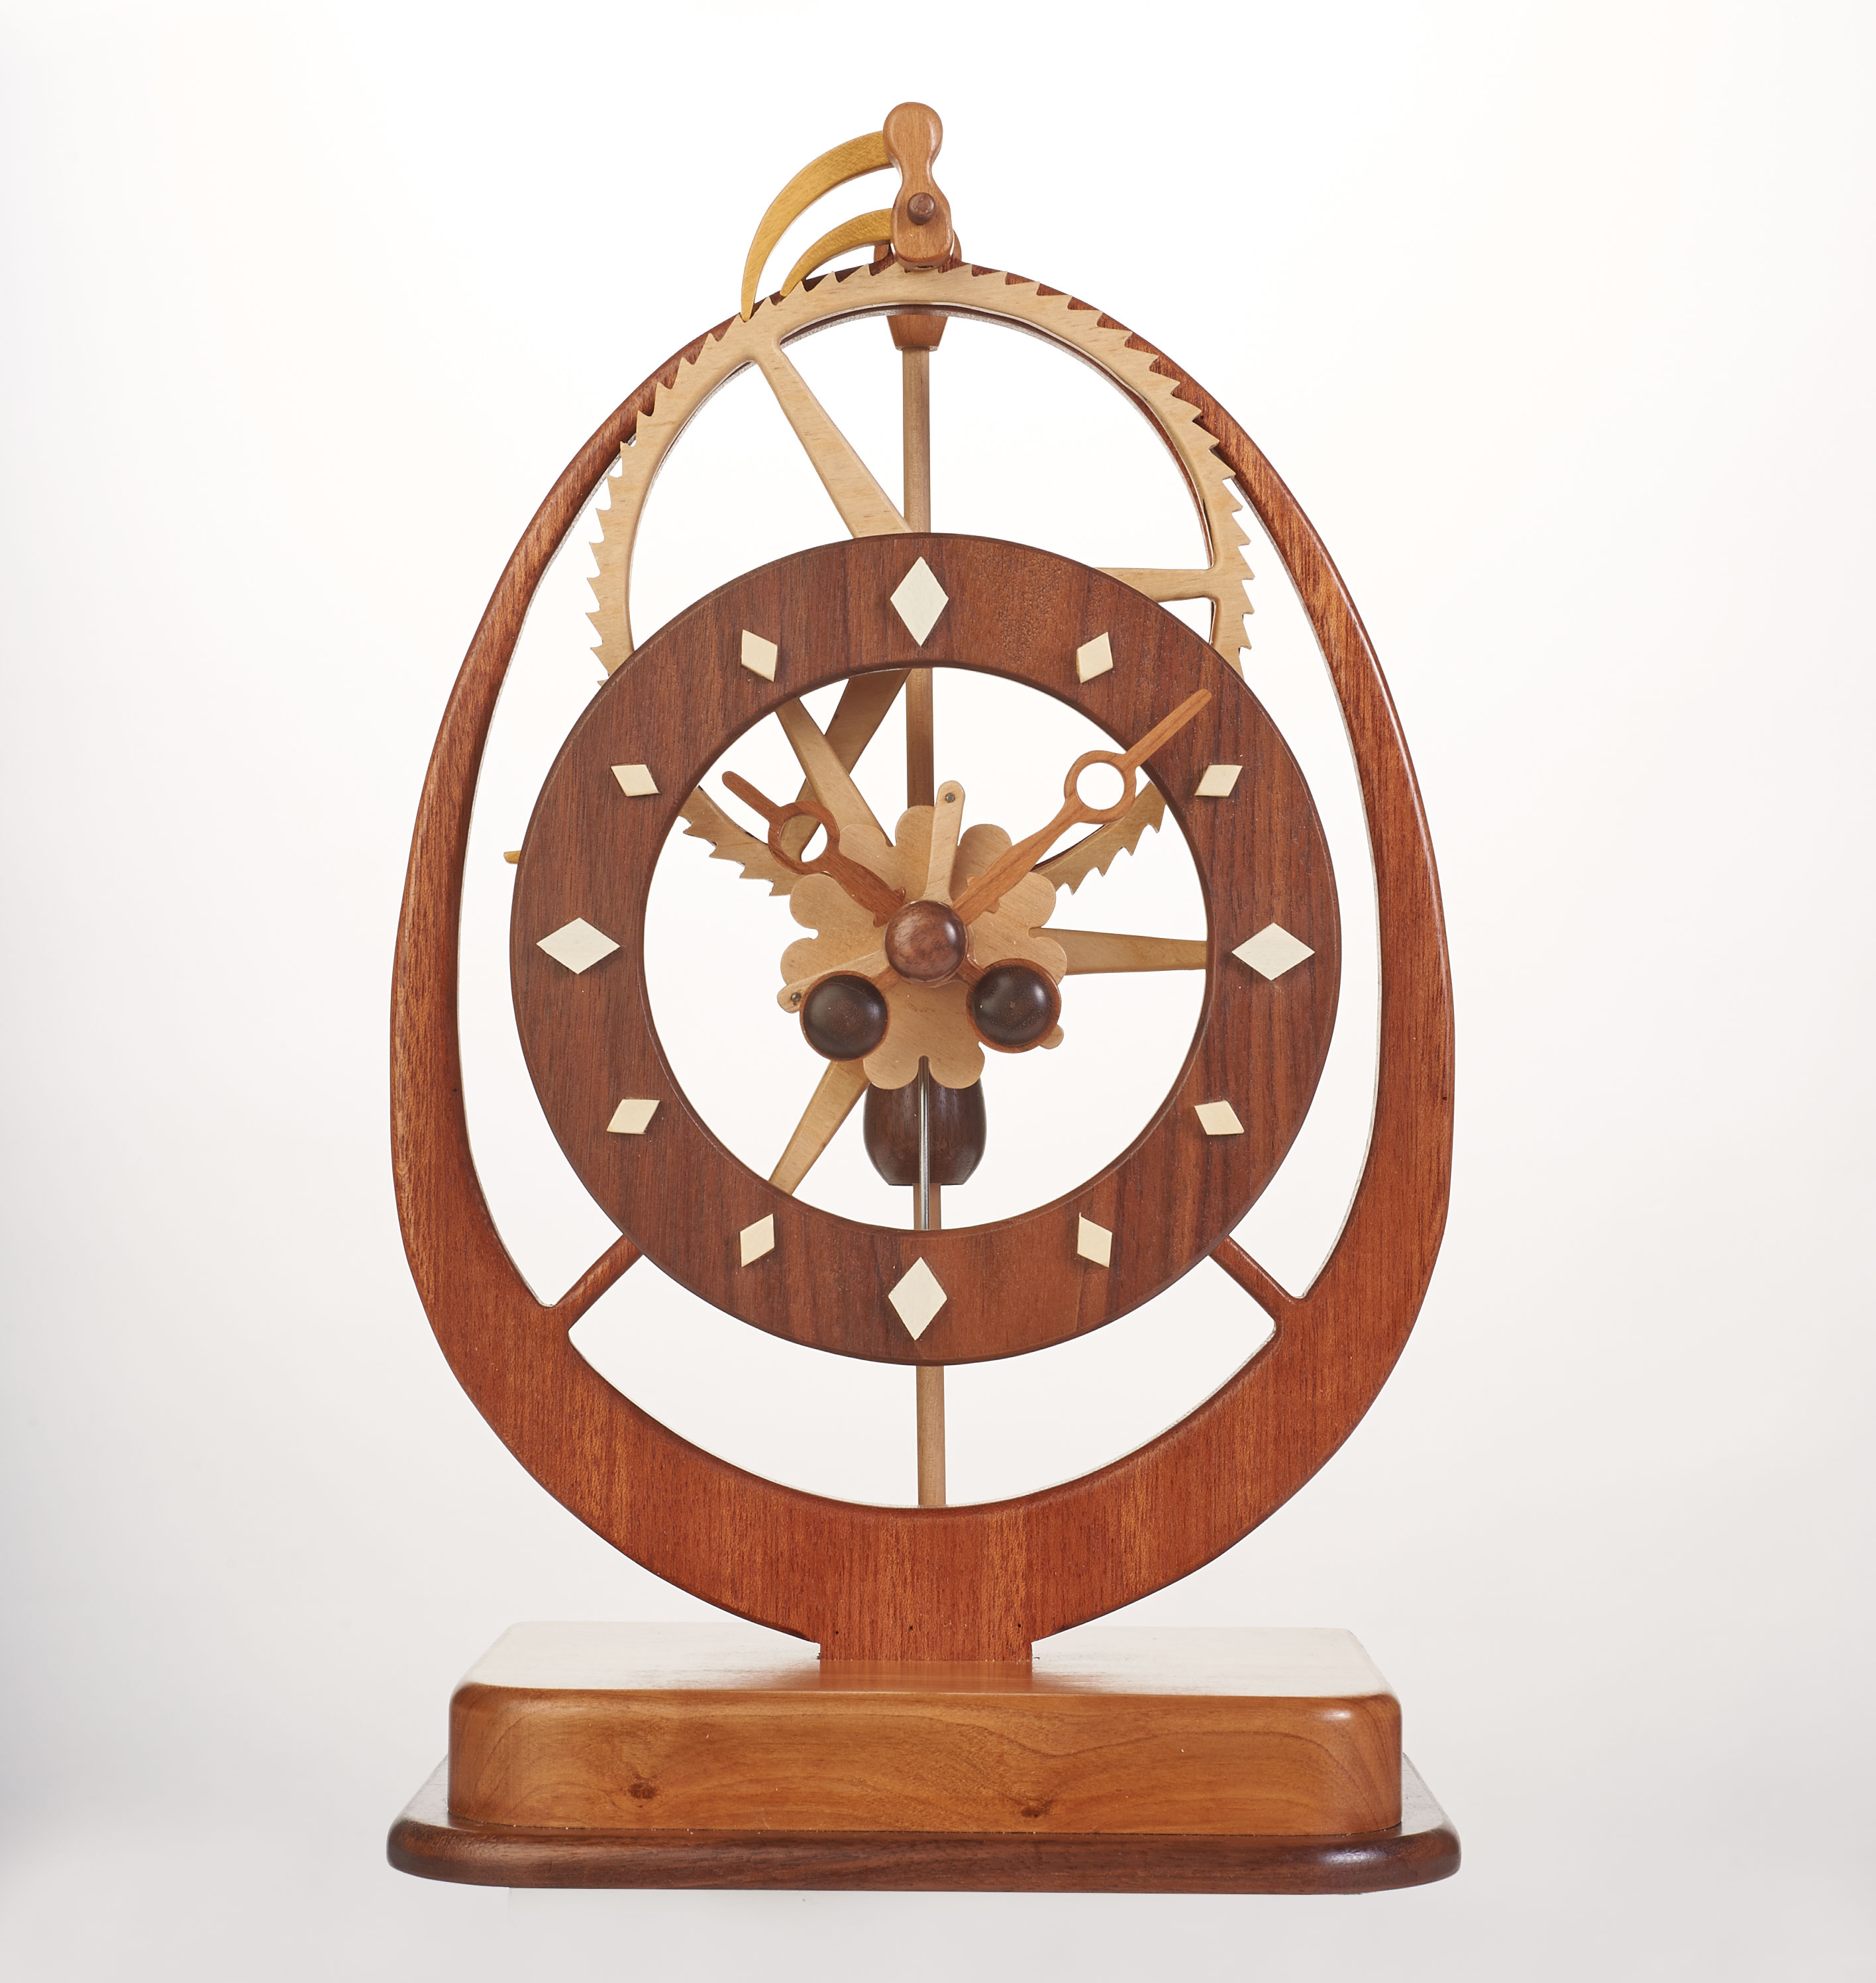 Electromagnetic Gear Clock - Scroll Saw Woodworking & Crafts
